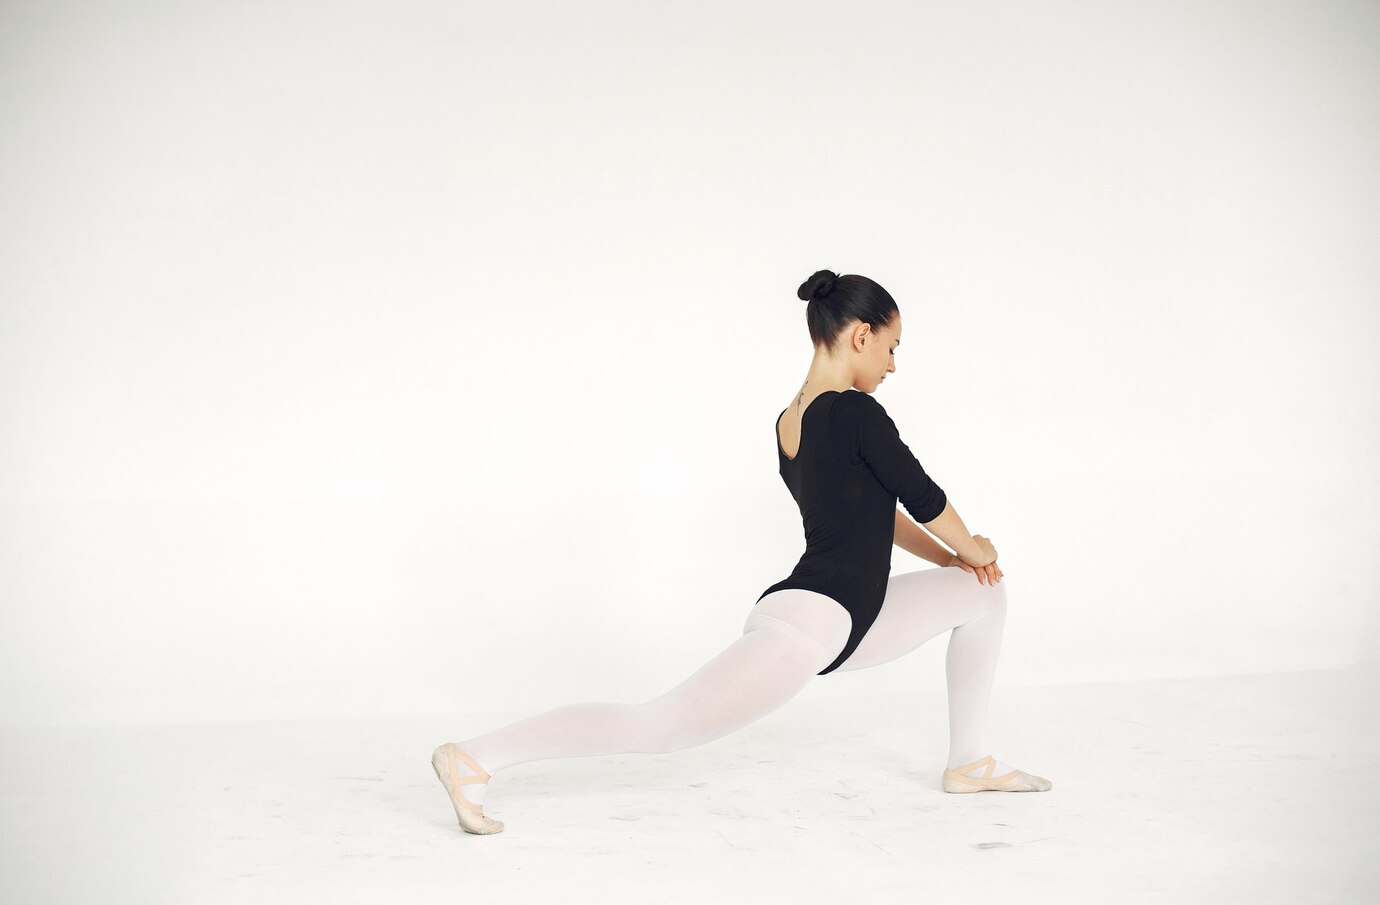 Ballet Stretches You Have to Try - Lunges